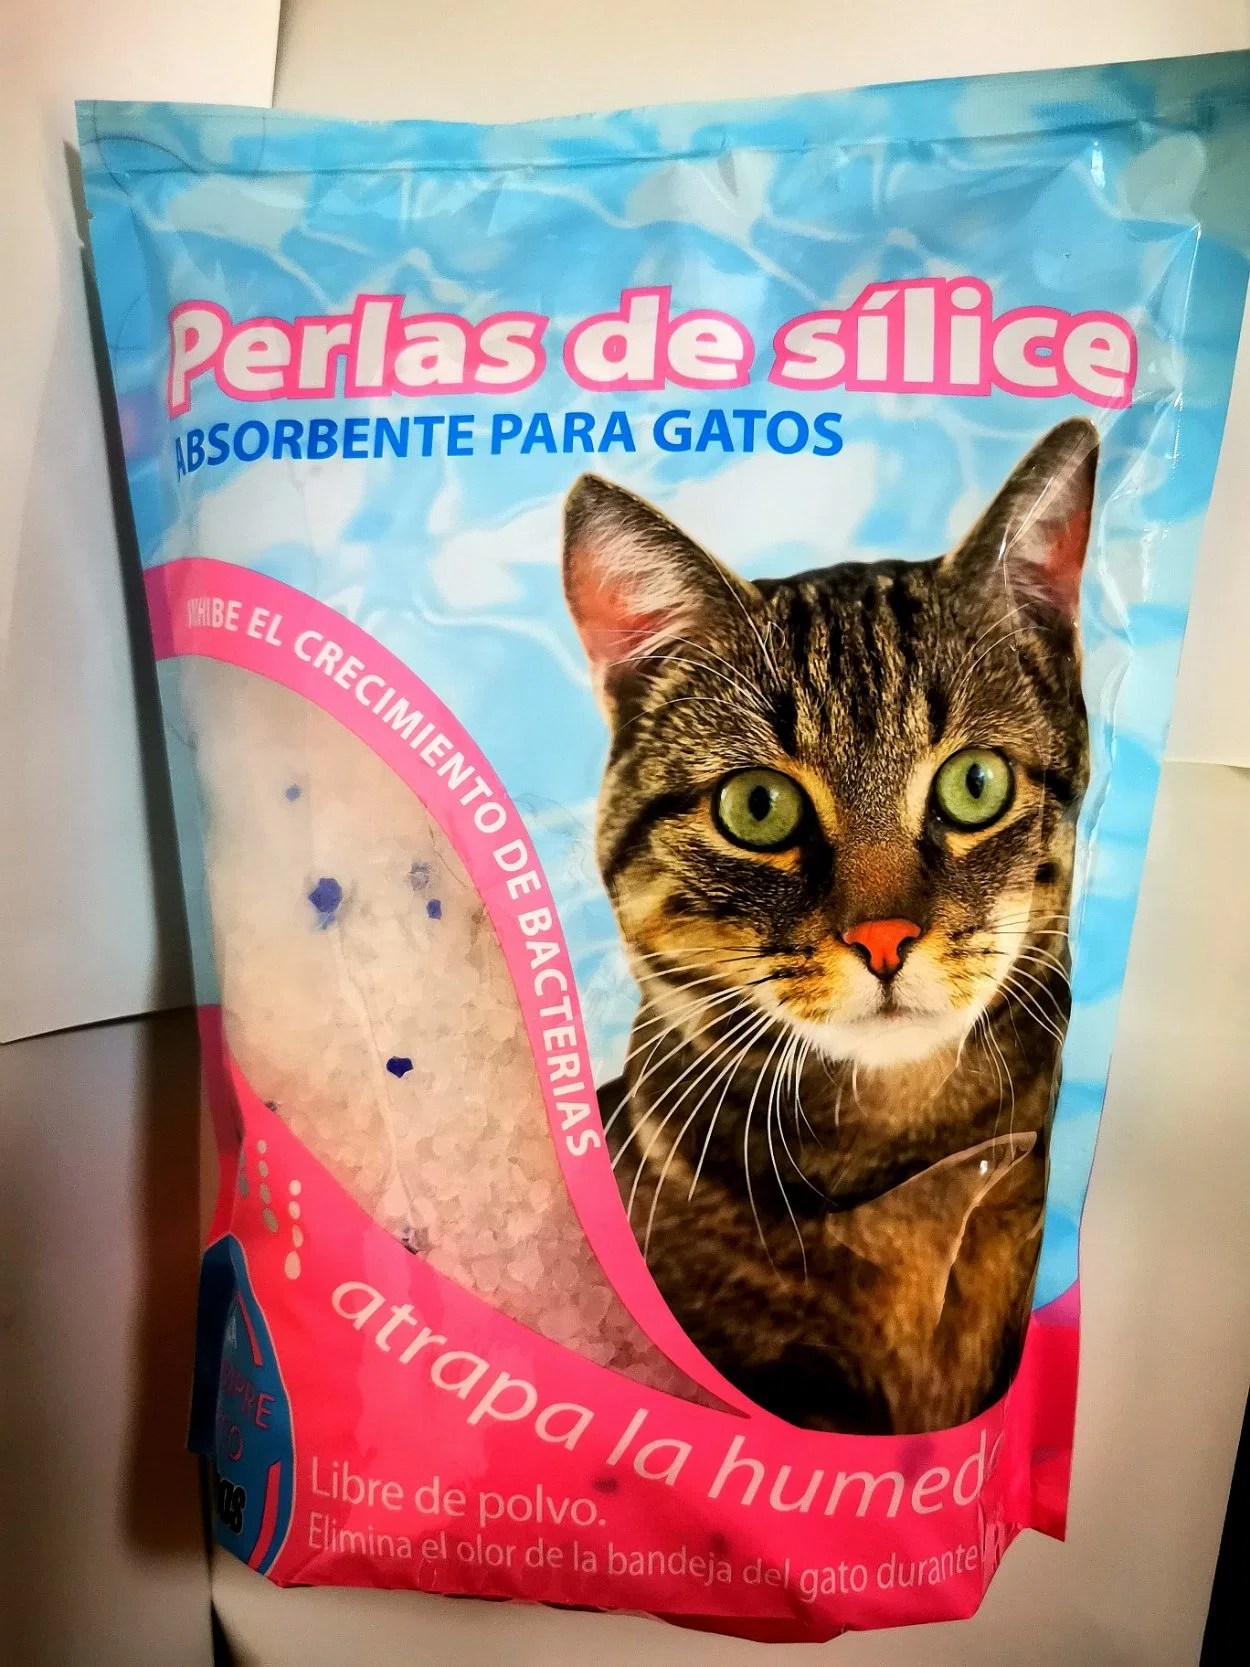 Chinese Pet Products Supplier Economical 3.8L Silica Gel Sand Clean Crystals Cat Litter Cleaning Easy